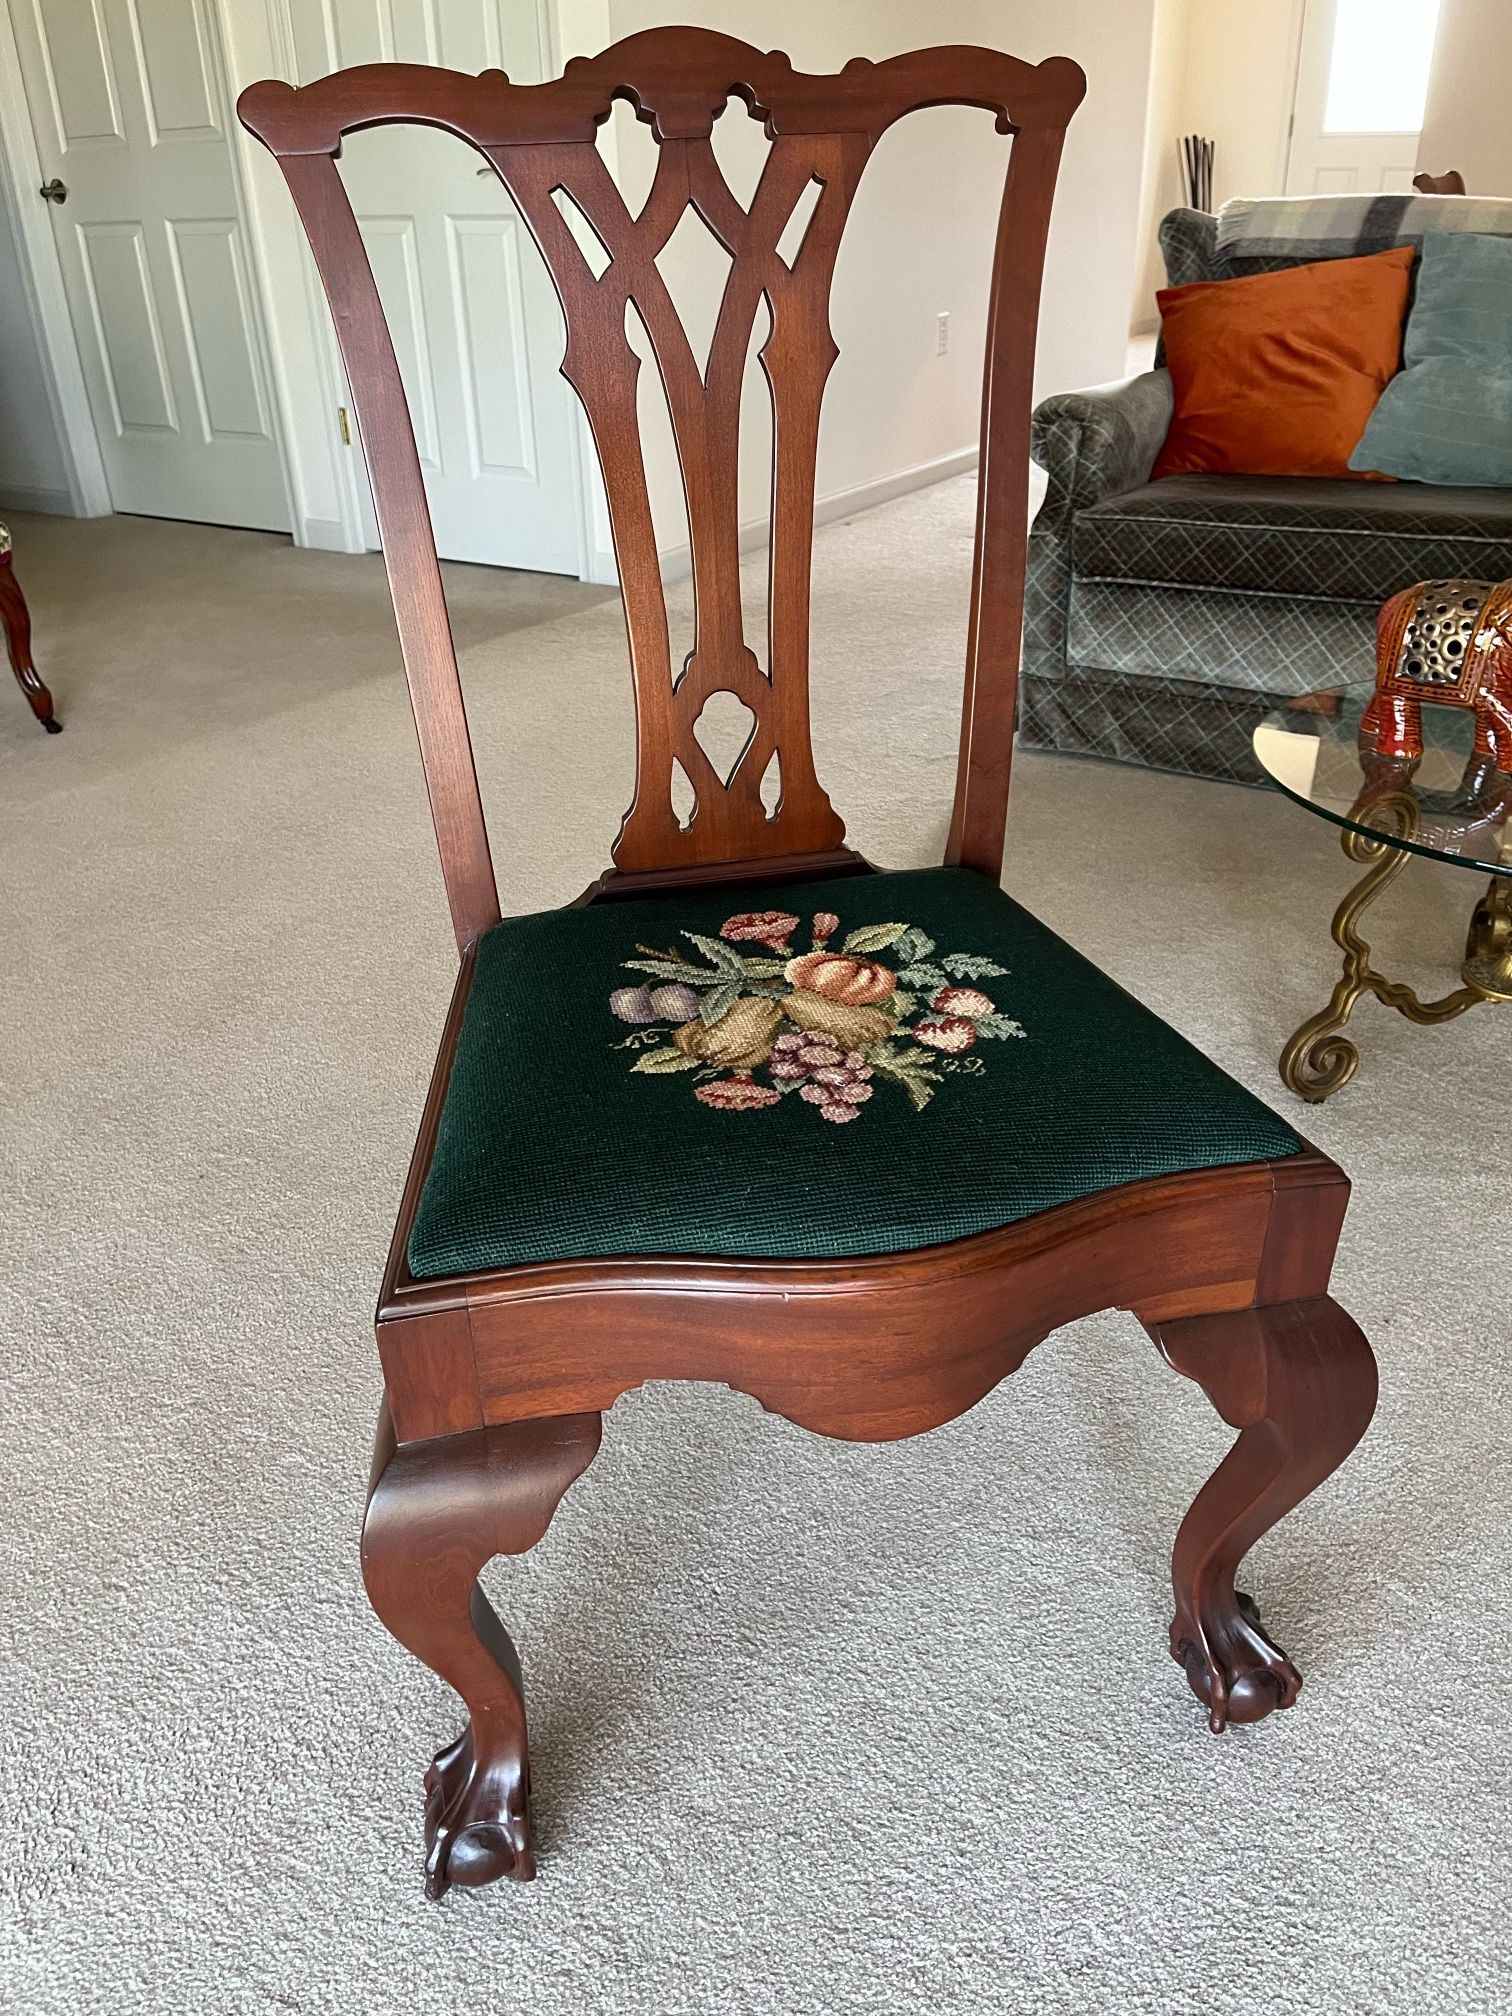 Antique Chippendale (Repro) Mahogany Chair with Ball and Claw Feet & Needlepoint